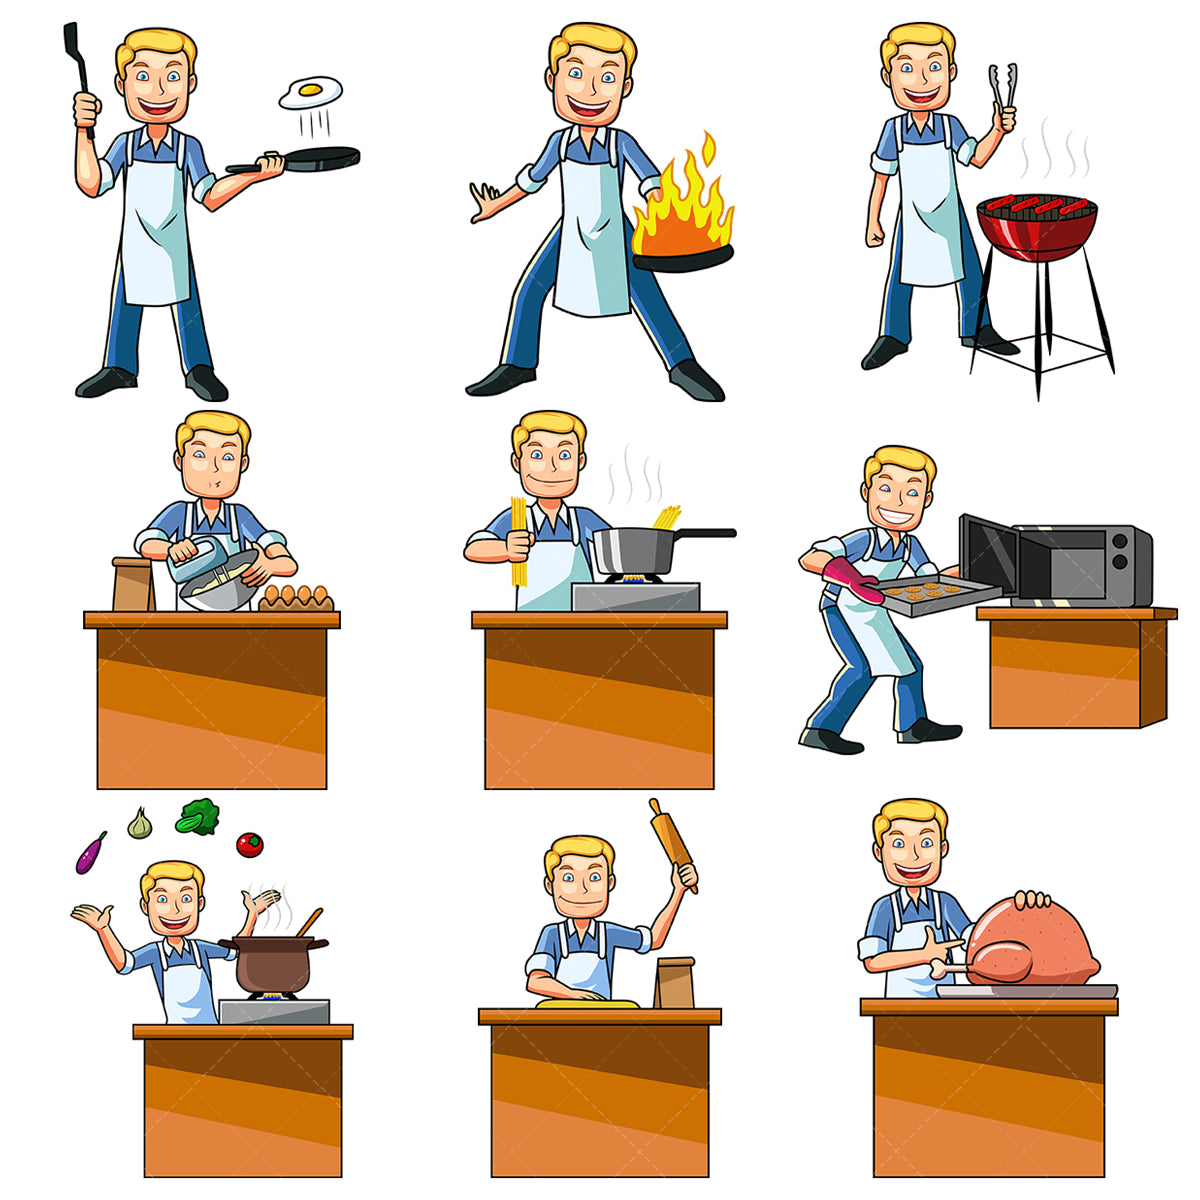 A bundle of 9 royalty-free stock vector illustrations of a caucasian man cooking.